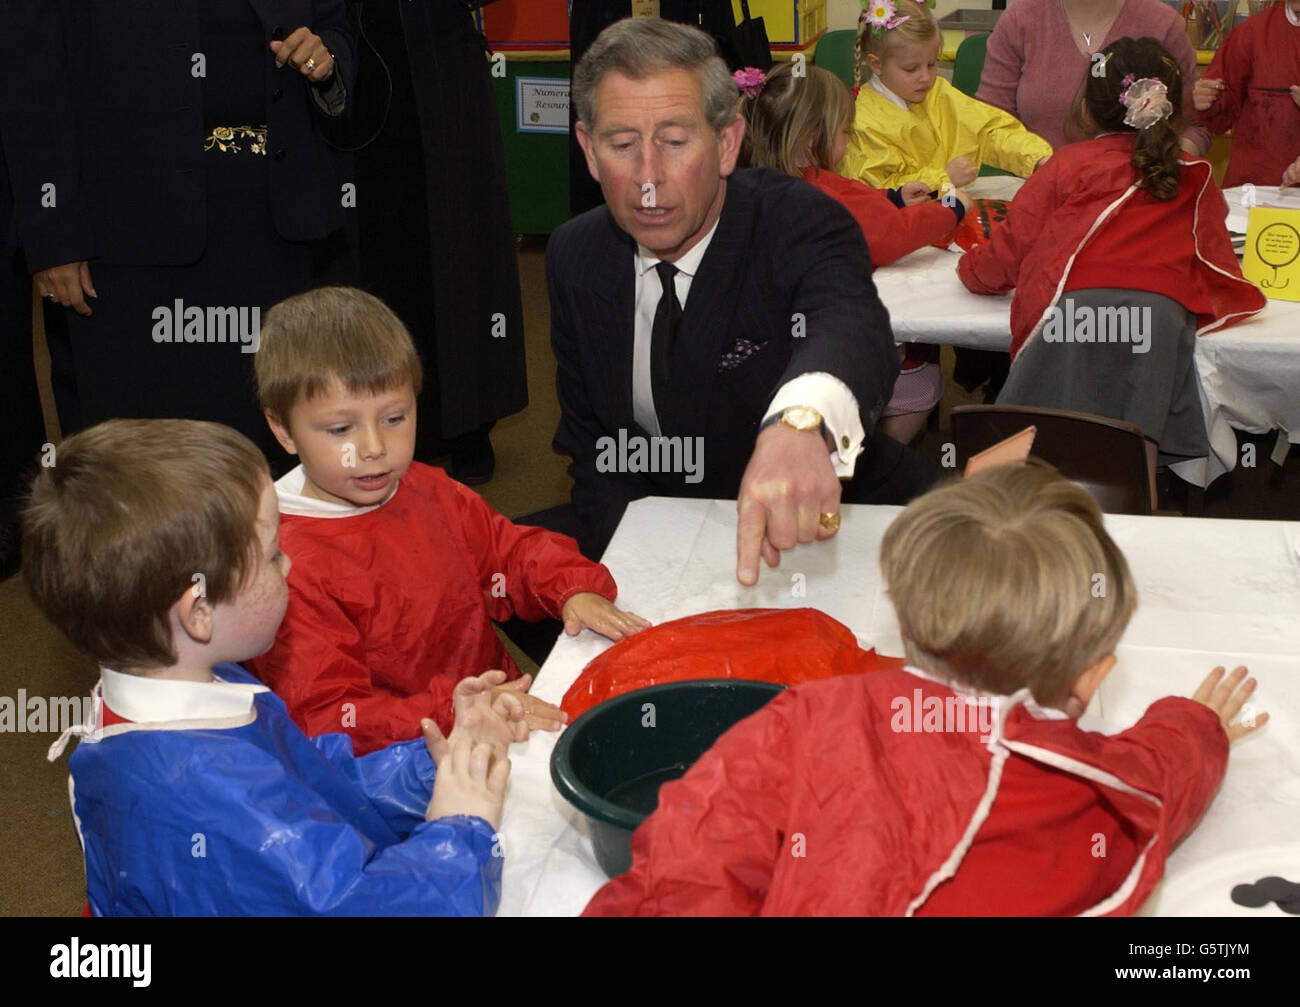 The Prince of Wales talks to pupils during a visit to the Lent Rise Combined School, Burnham, near Slough. The school is a leading light in a nationwide scheme inspired by Charles five years ago where trainee teachers get full-time hands-on experience. *... under supervision of experienced teachers as part of their training. Stock Photo